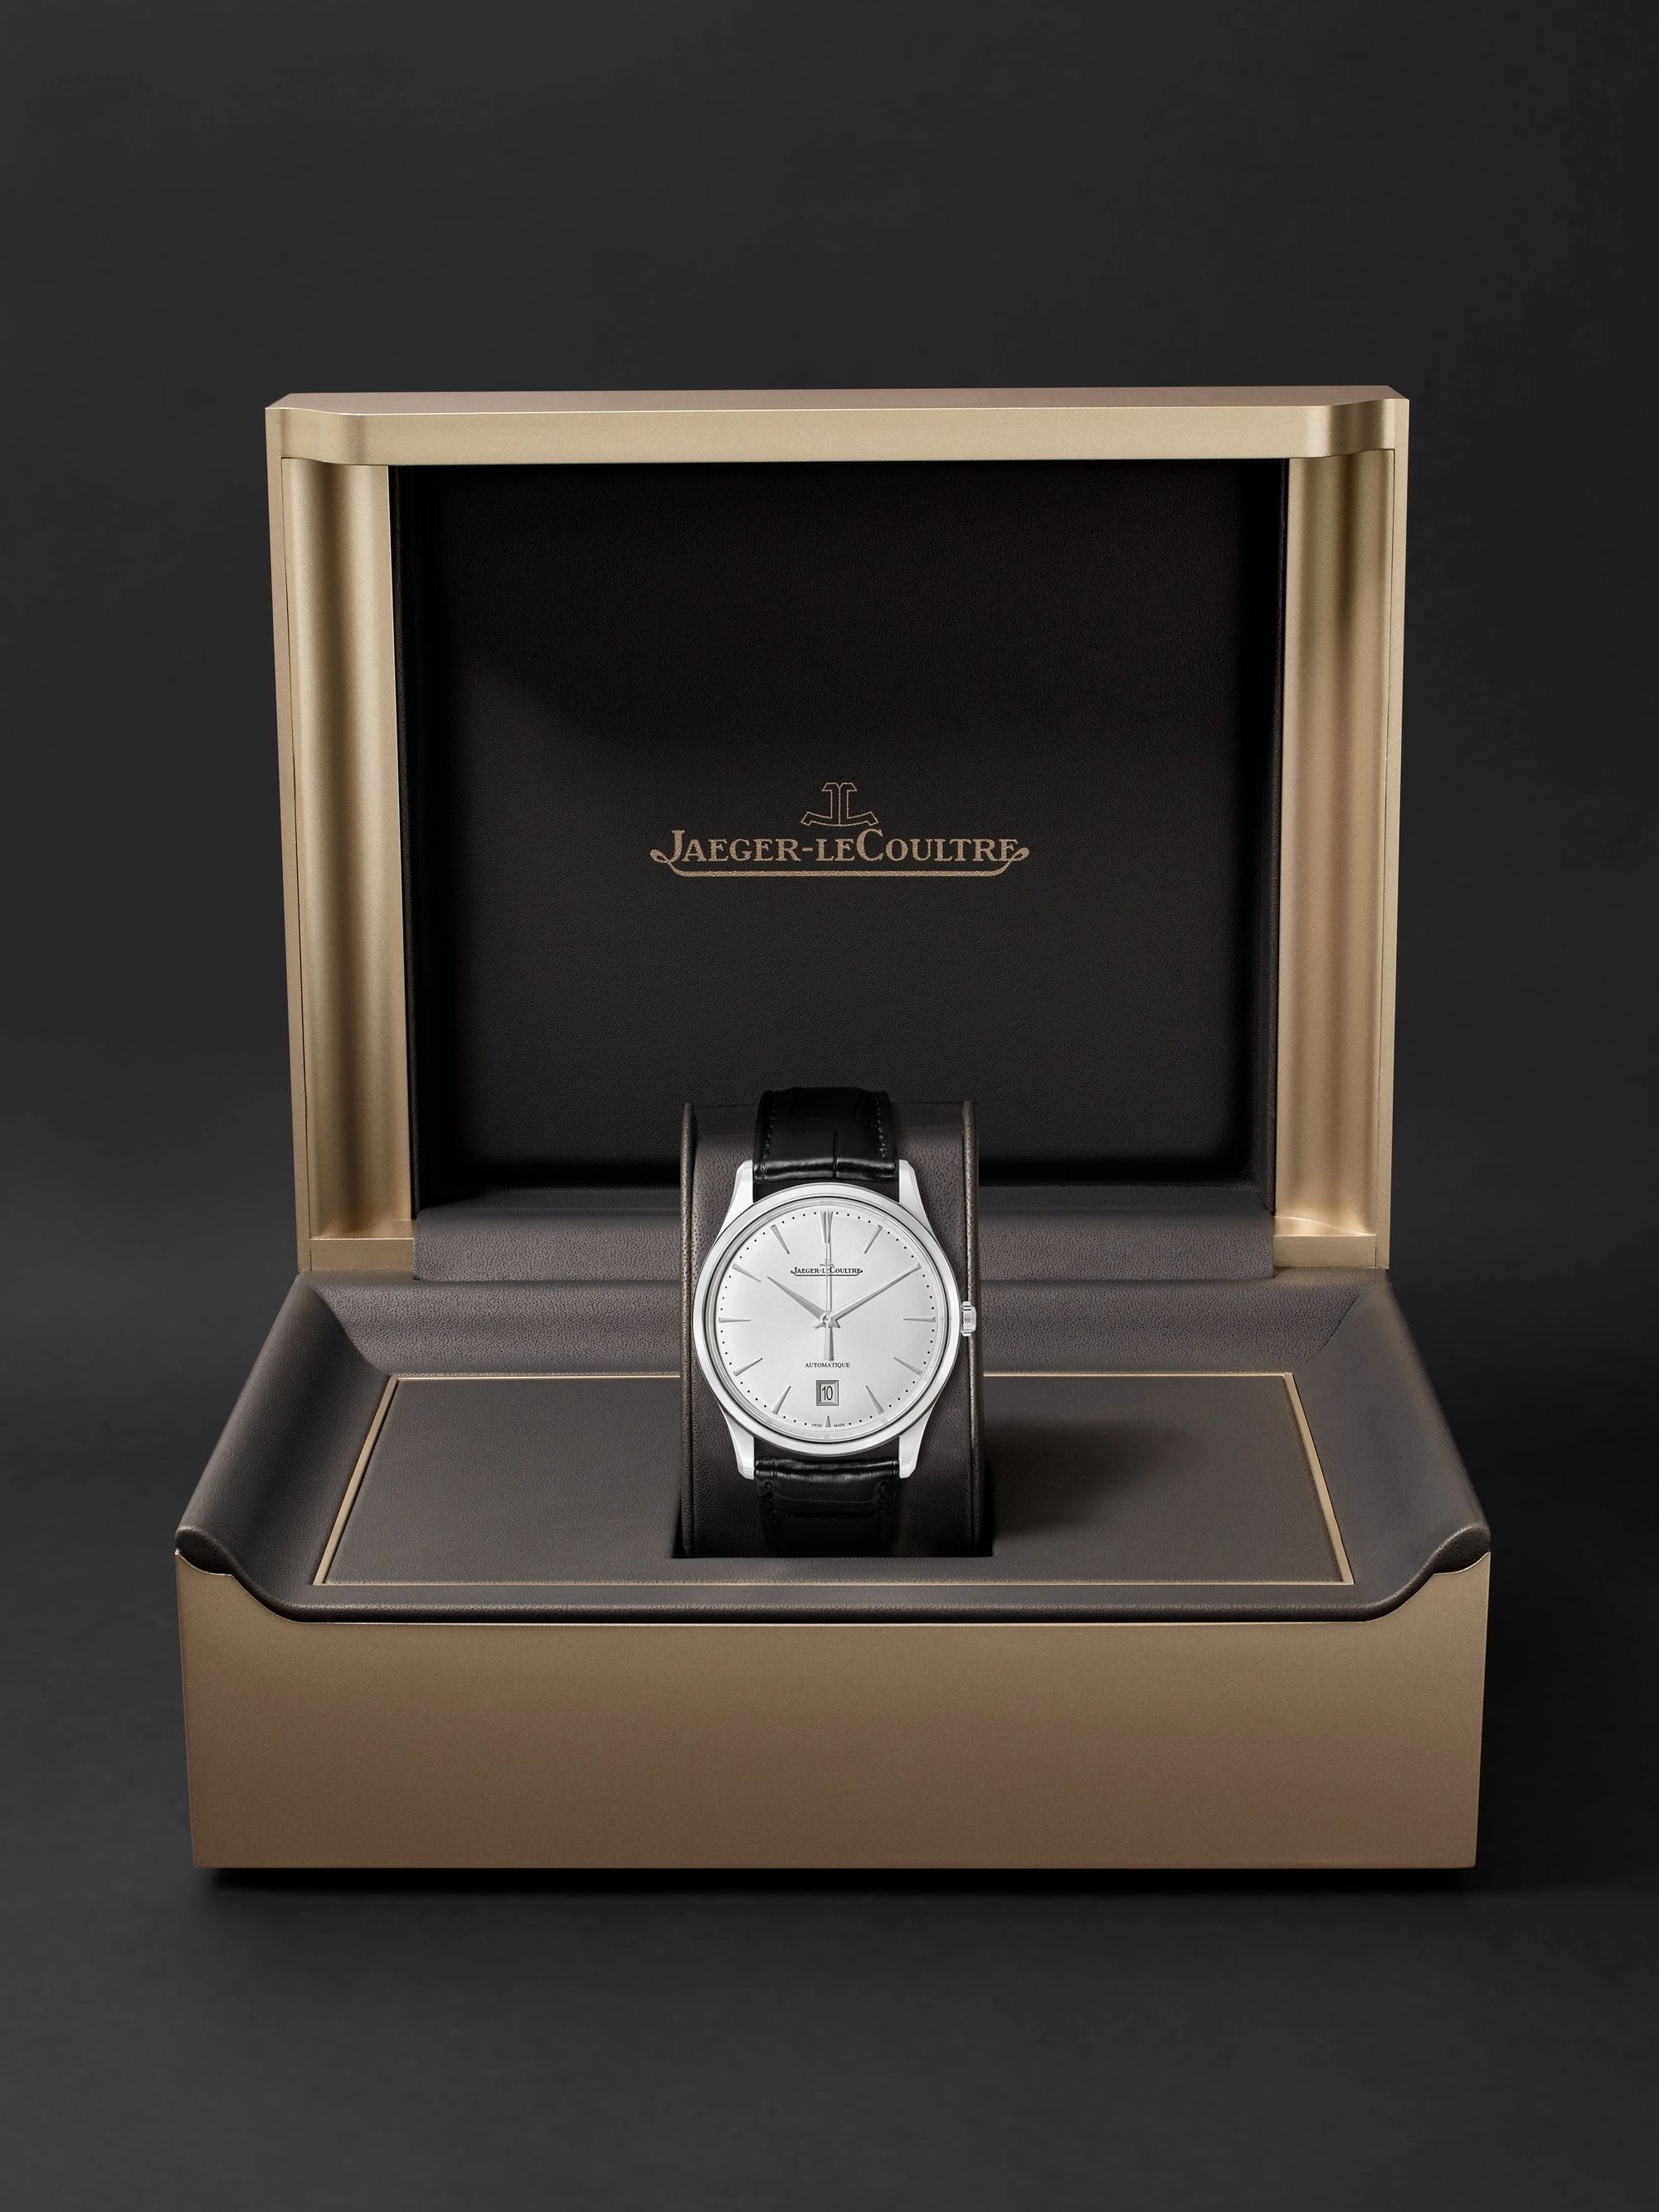 JAEGER-LECOULTRE Master Ultra Thin Date Automatic 39mm Stainless Steel and Alligator Watch, Ref. No. 1238420